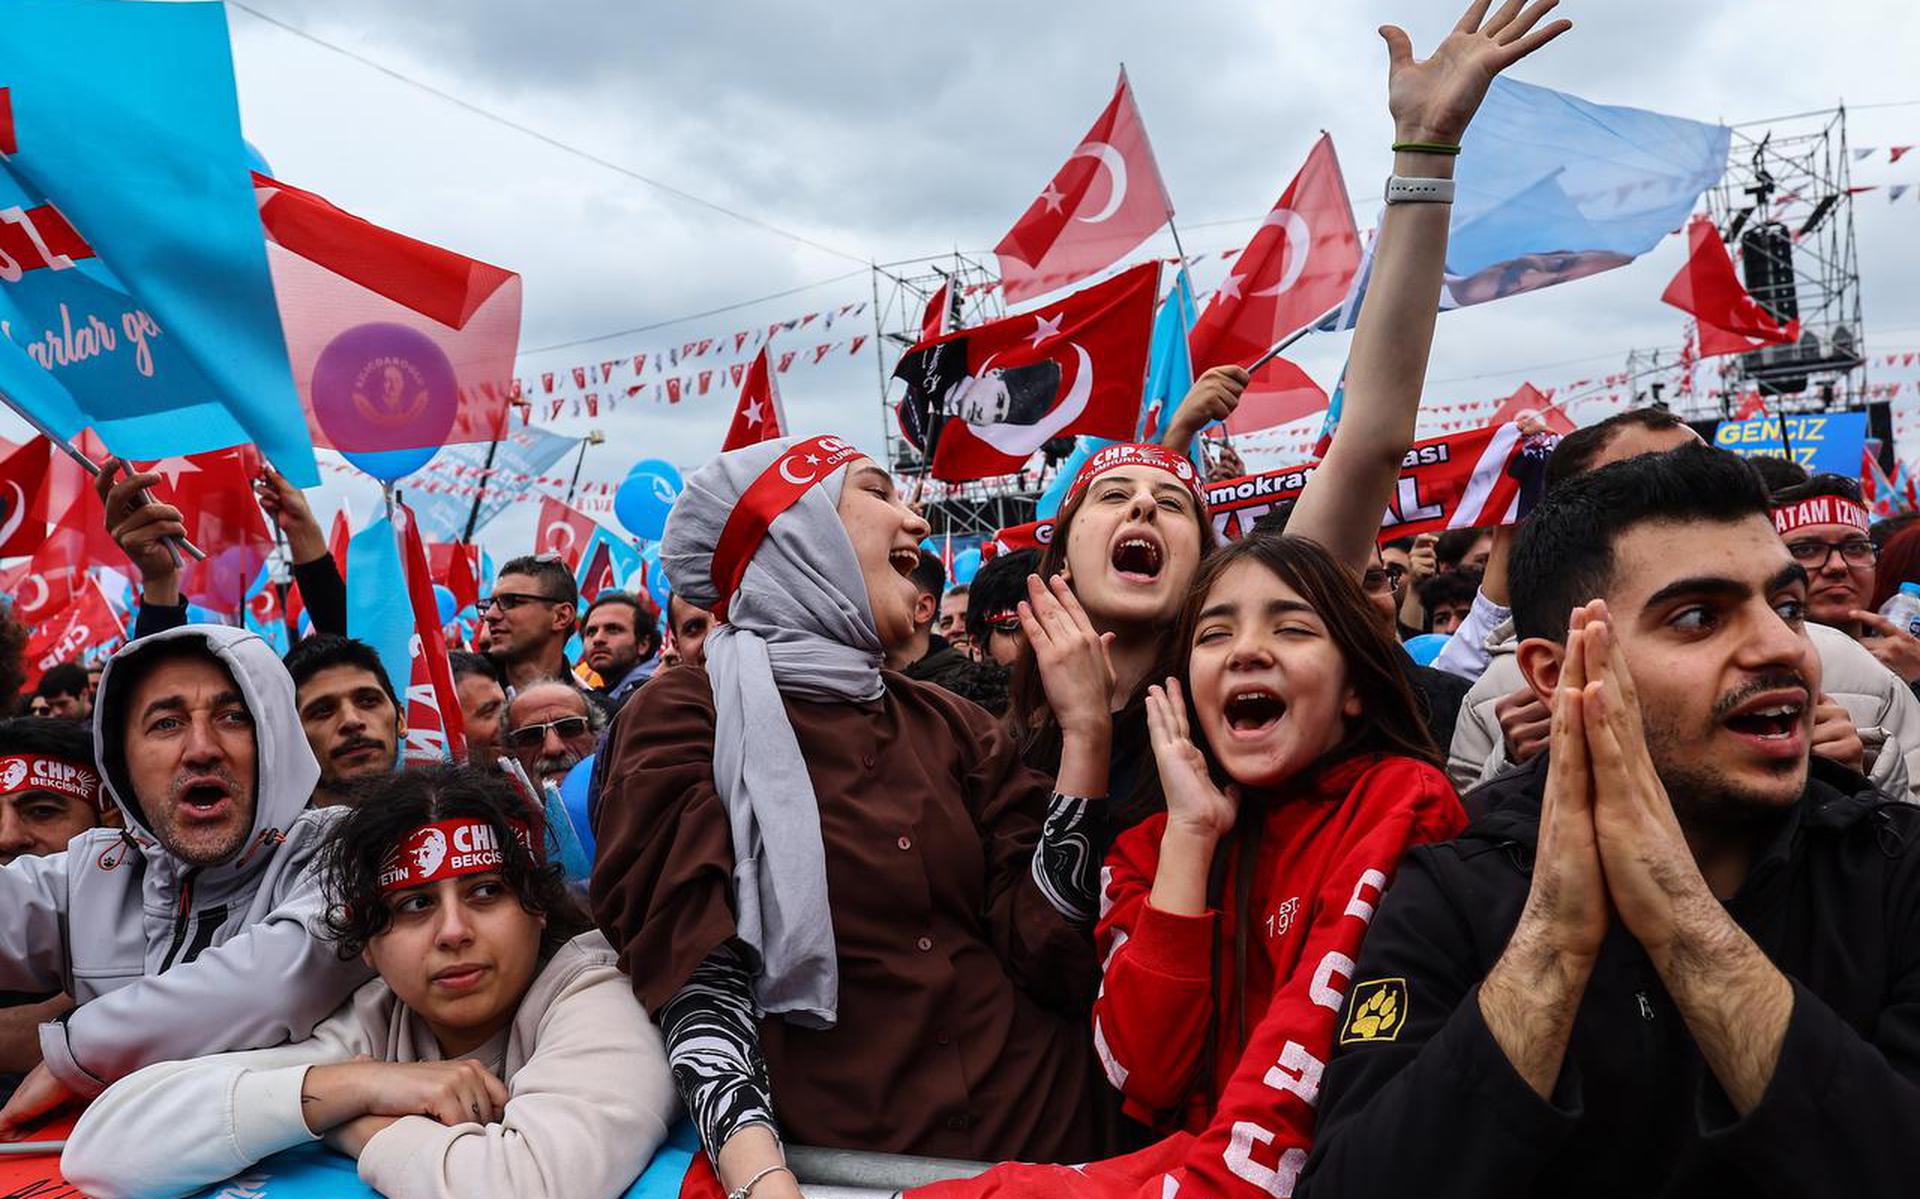 epa10612769 Supporters of Turkish presidential candidate Kemal Kilicdaroglu (not pictured), leader of the opposition Republican People's Party (CHP), attend his election campaign event in Istanbul, Turkey, 06 May 2023. Turkey will hold its general election on 14 May 2023 with a two-round system to elect its president, while parliamentary elections will be held simultaneously.  EPA/SEDAT SUNA